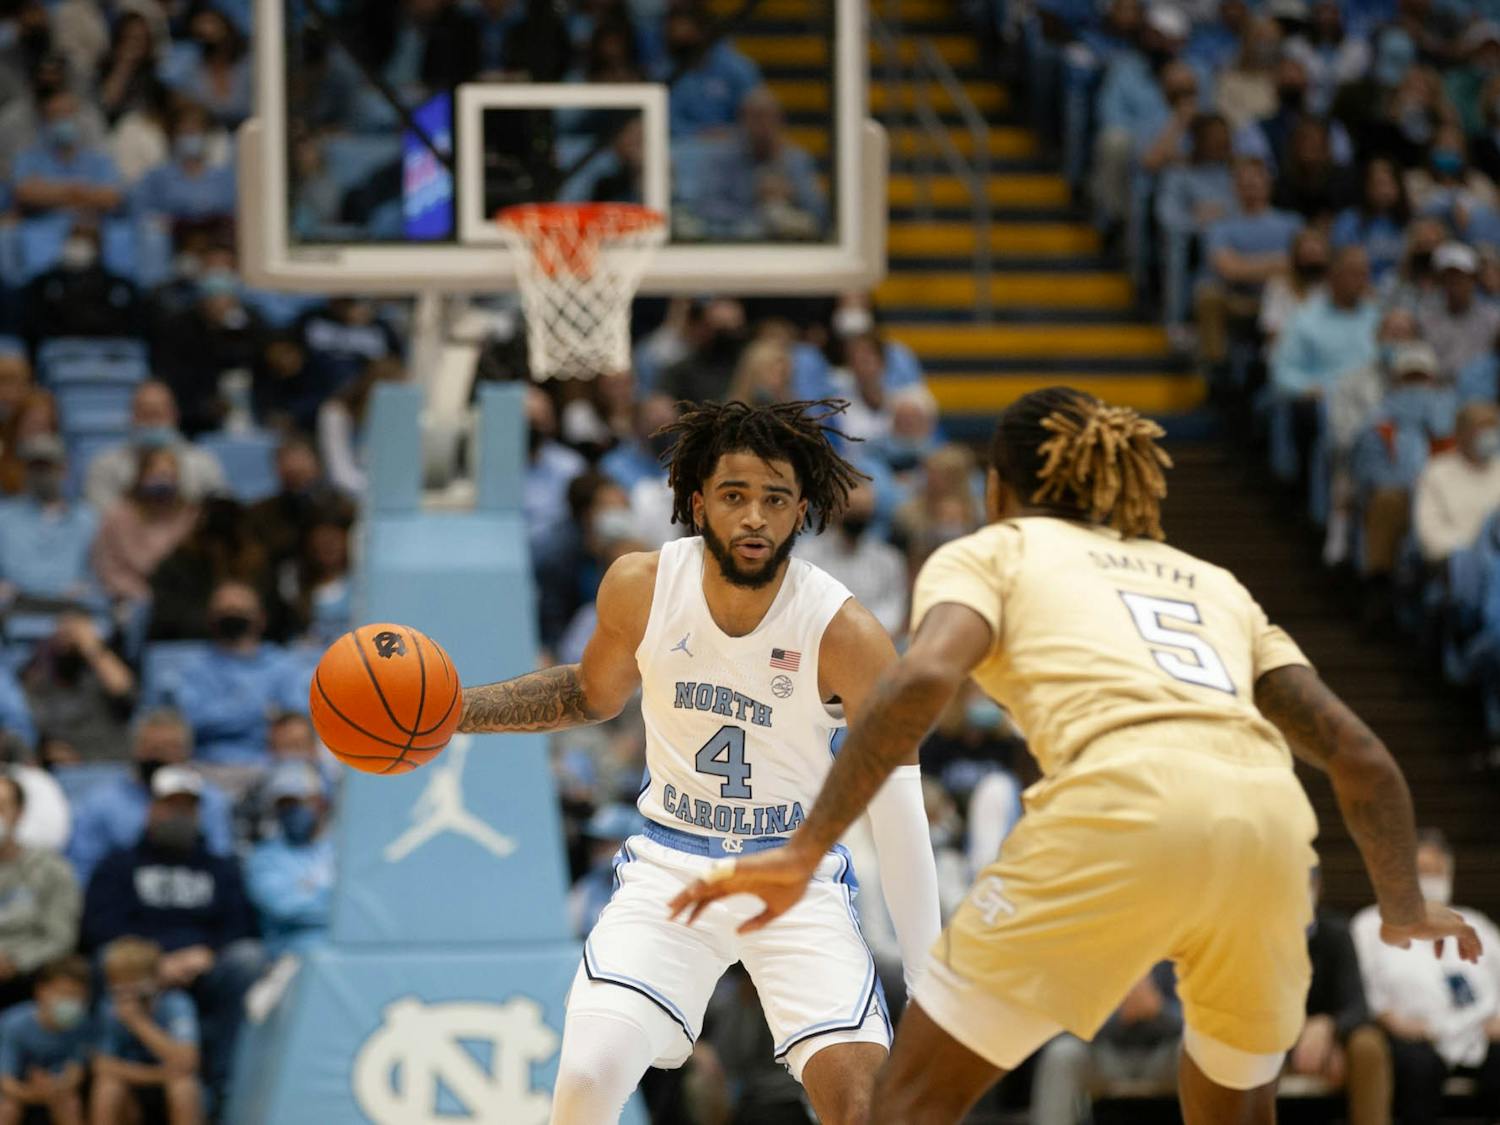 Sophomore RJ Davis (4) dribbles the ball at the game against Georgia Tech at the Dean Smith Center in Chapel Hill on Saturday, Jan. 15, 2022. UNC won 88-65.